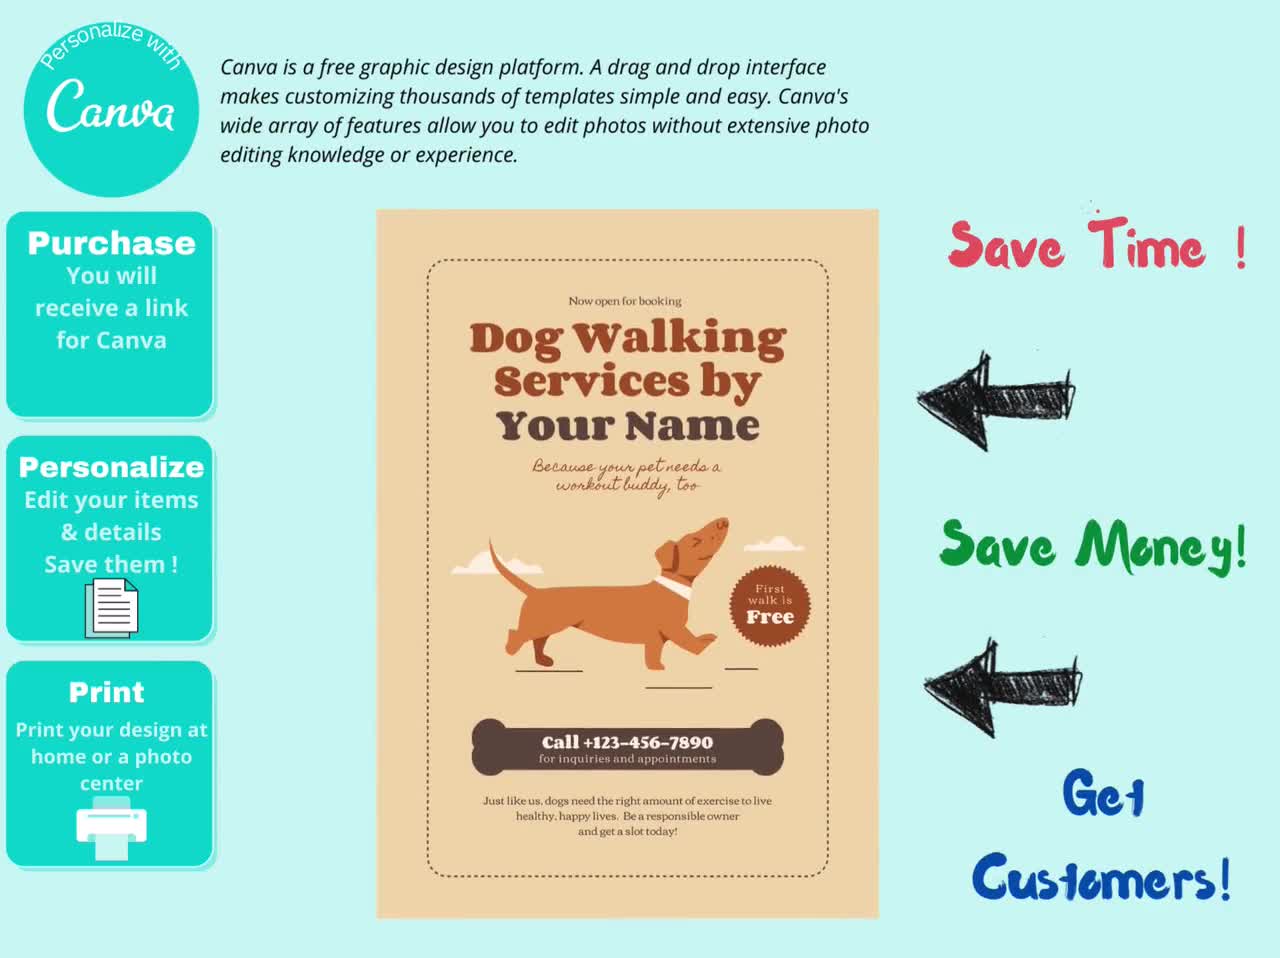 how do i get clients for my dog walking business